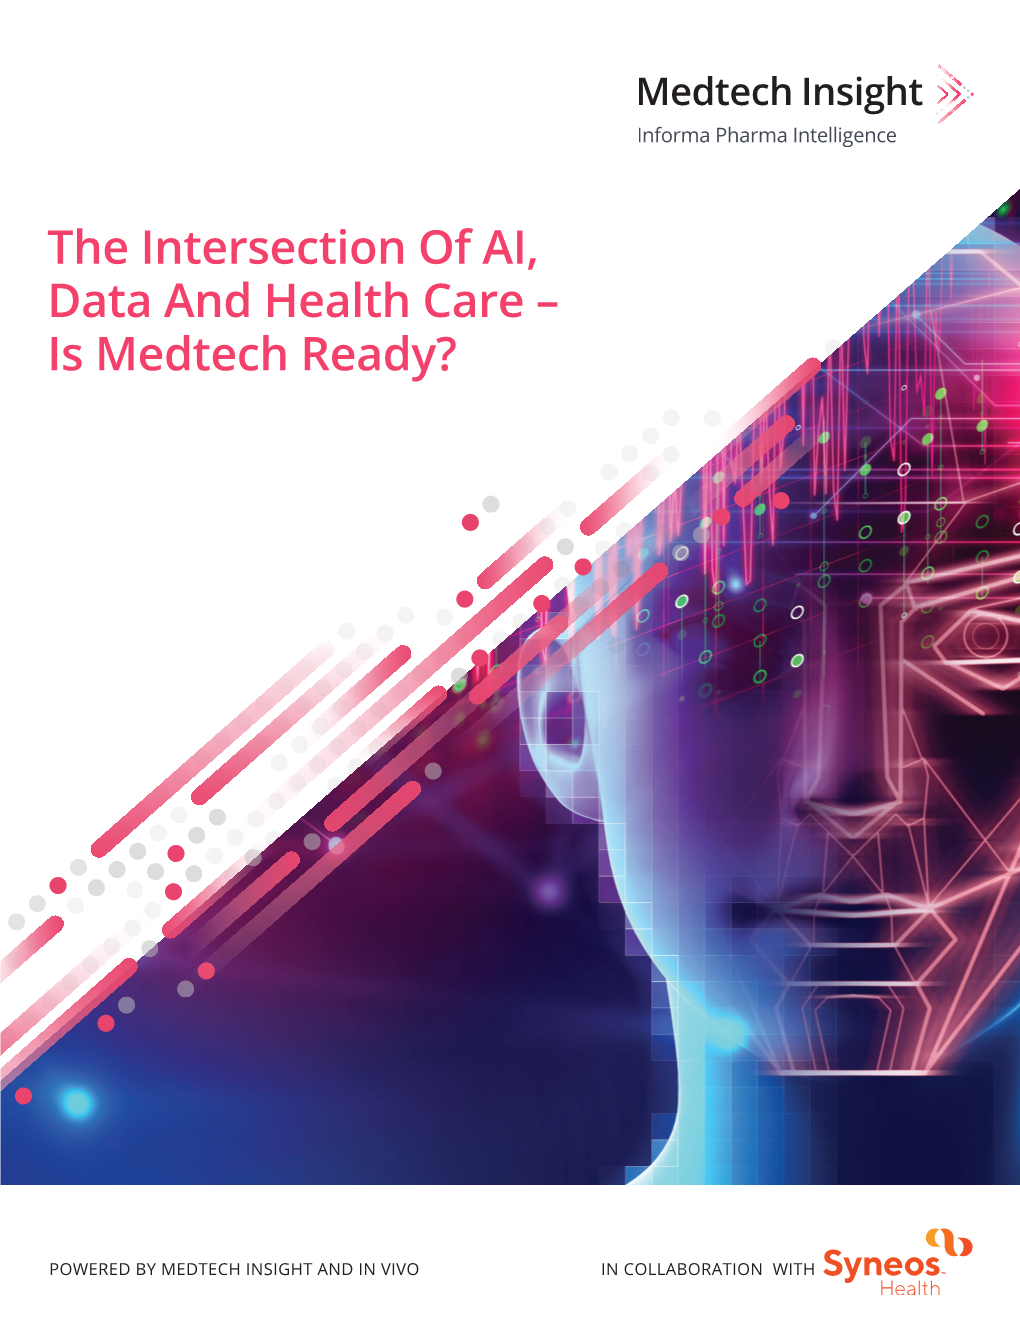 The Intersection of AI, Data and Health Care – Is Medtech Ready?